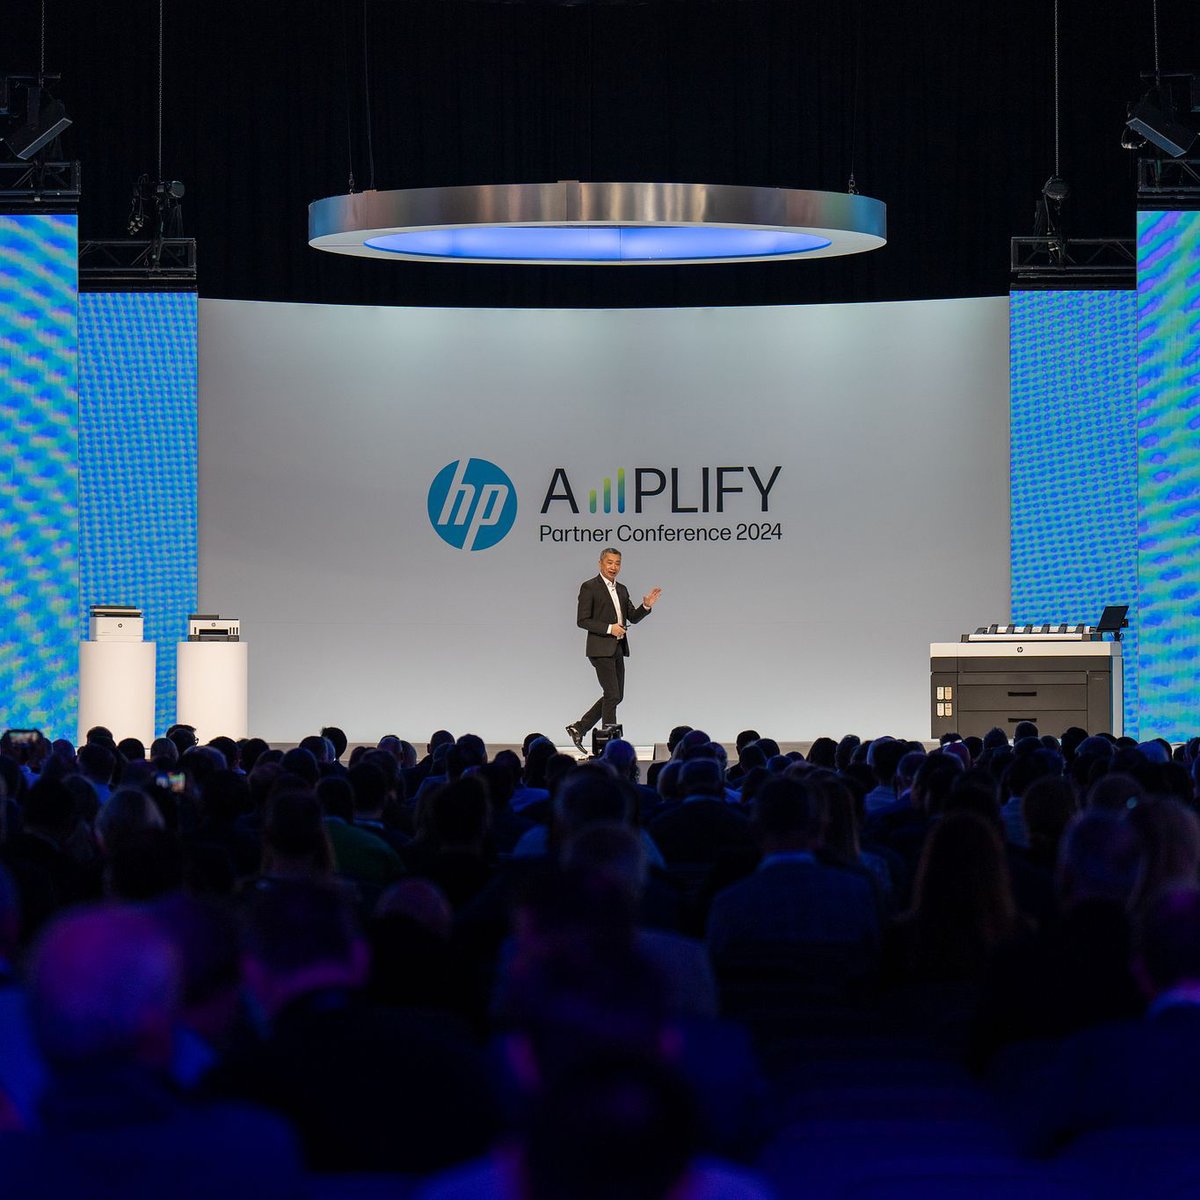 That's a wrap on #HPAmplify Partner Conference 2024 in Vegas! Dive into more news and insights on our Future Ready strategy: bit.ly/3TAnAFr #UnitedWeWin